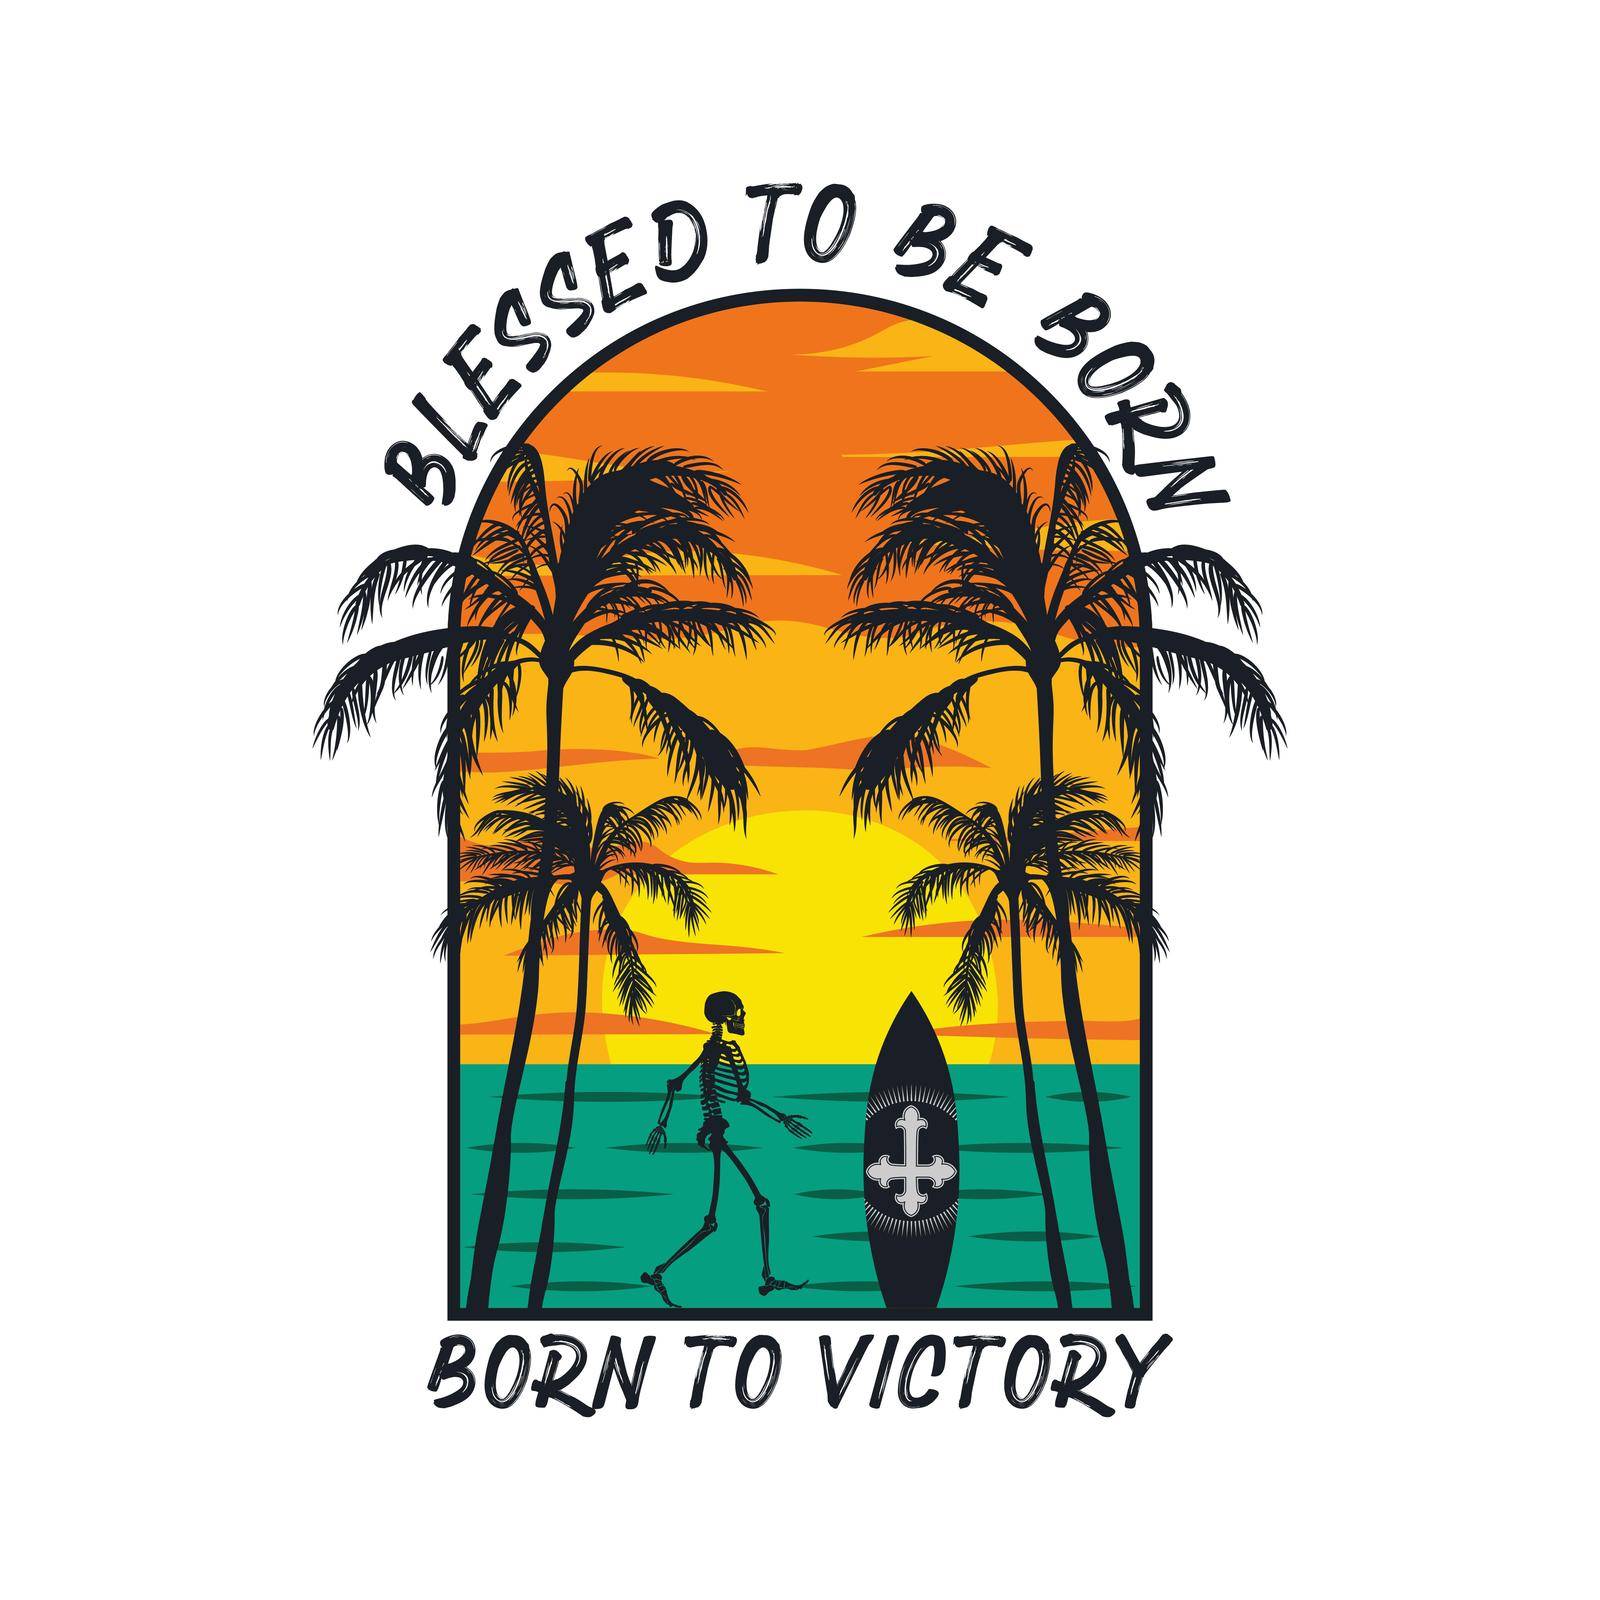 Blessed to be born, born to victory. Summer time and surfing artwork design.